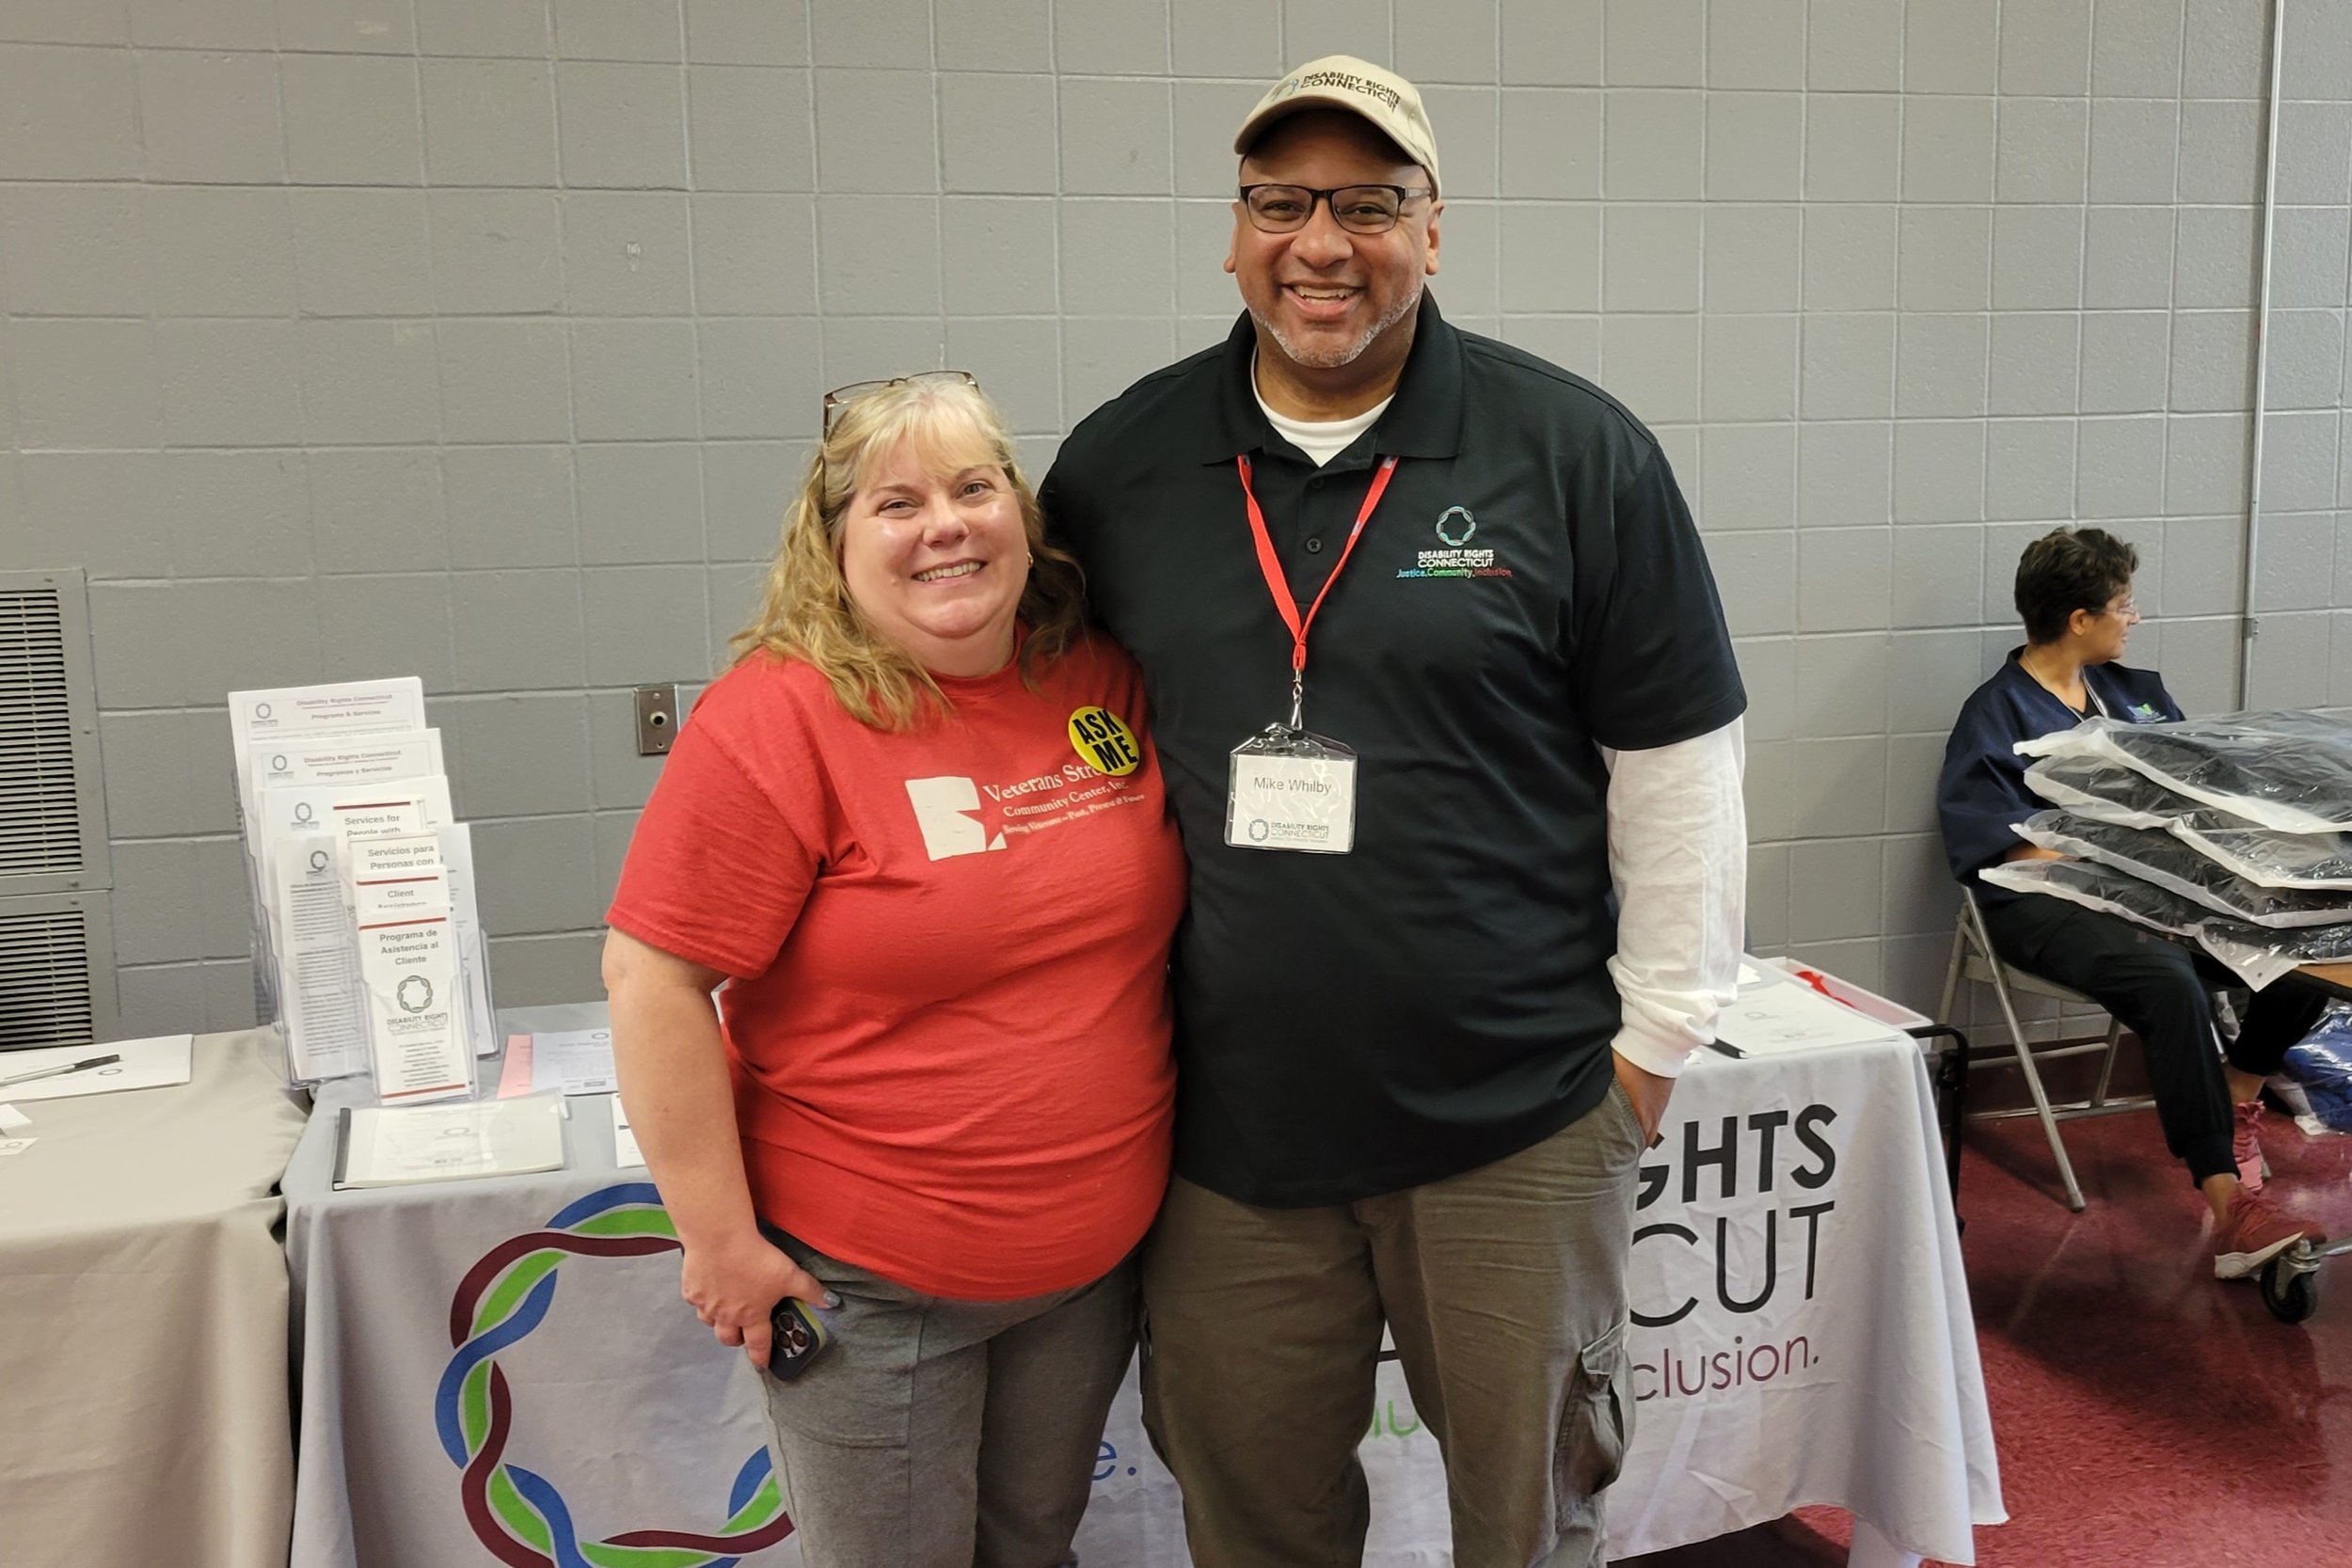   DRCT’s Strategic Partnerships Manager, Mike Whilby stands smiling (on the right side) with Donna M. Dognin, Co-Founder/Executive Director of Veterans Strong Community Center, Inc in front of DRCT resource table with two individuals sitting at a tab